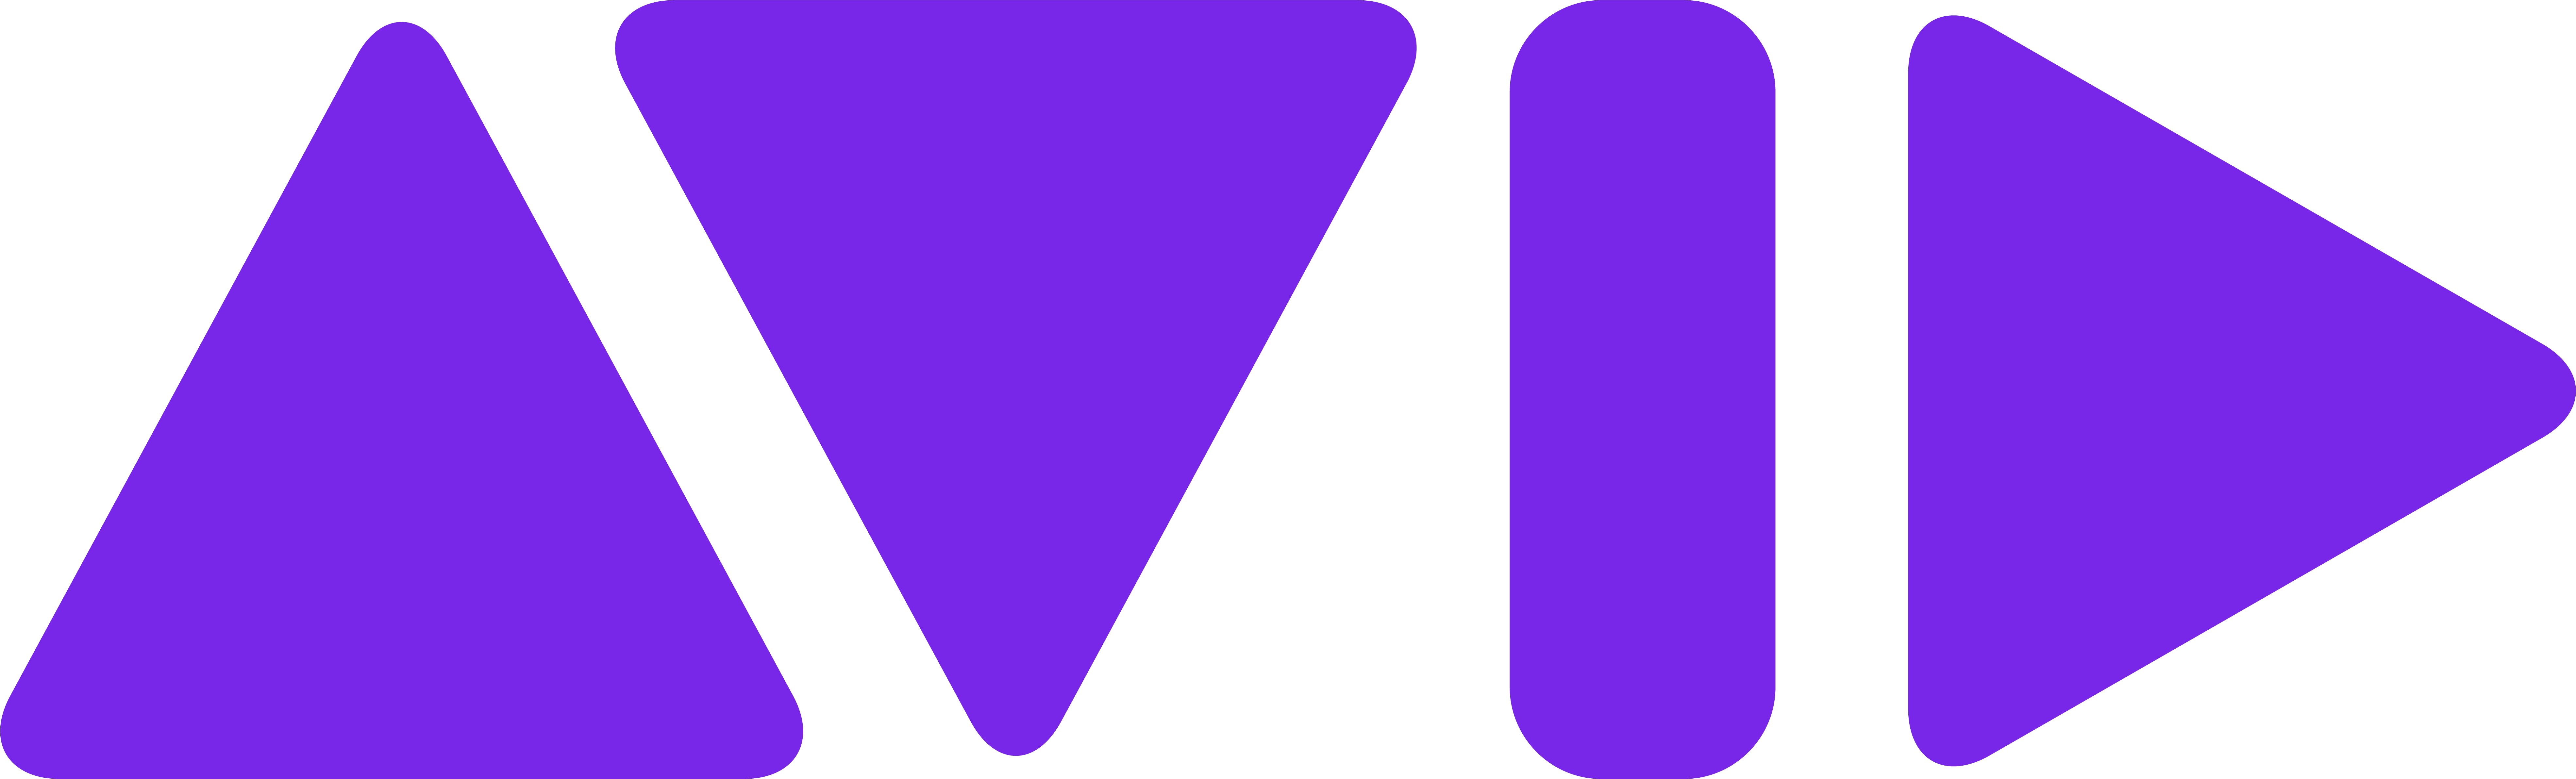 A picture of the AVID logo.